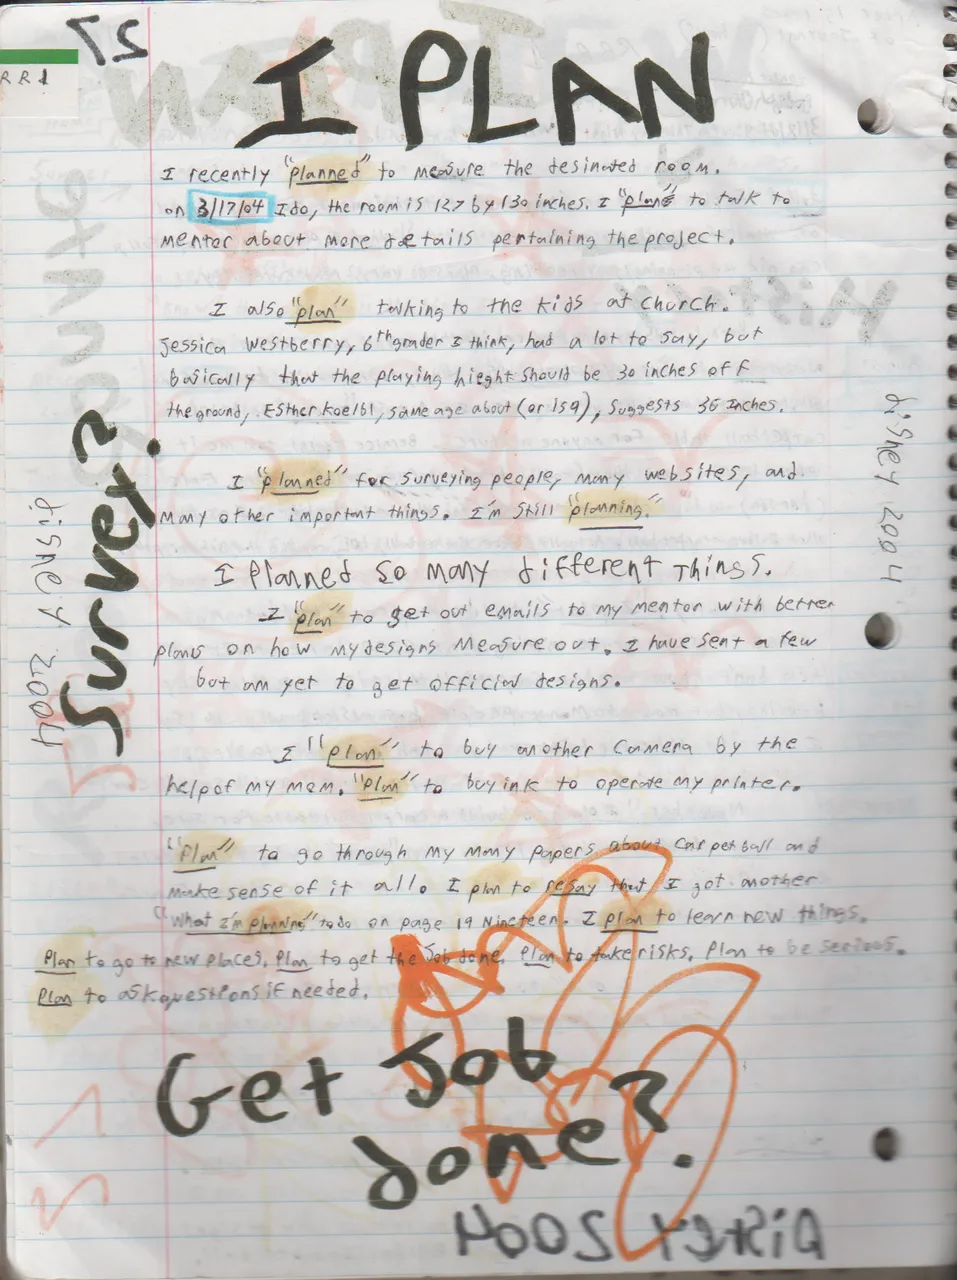 2004-01-29 - Thursday - Carpetball FGHS Senior Project Journal, Joey Arnold, Part 02, 96pages numbered, Notebook-23.png